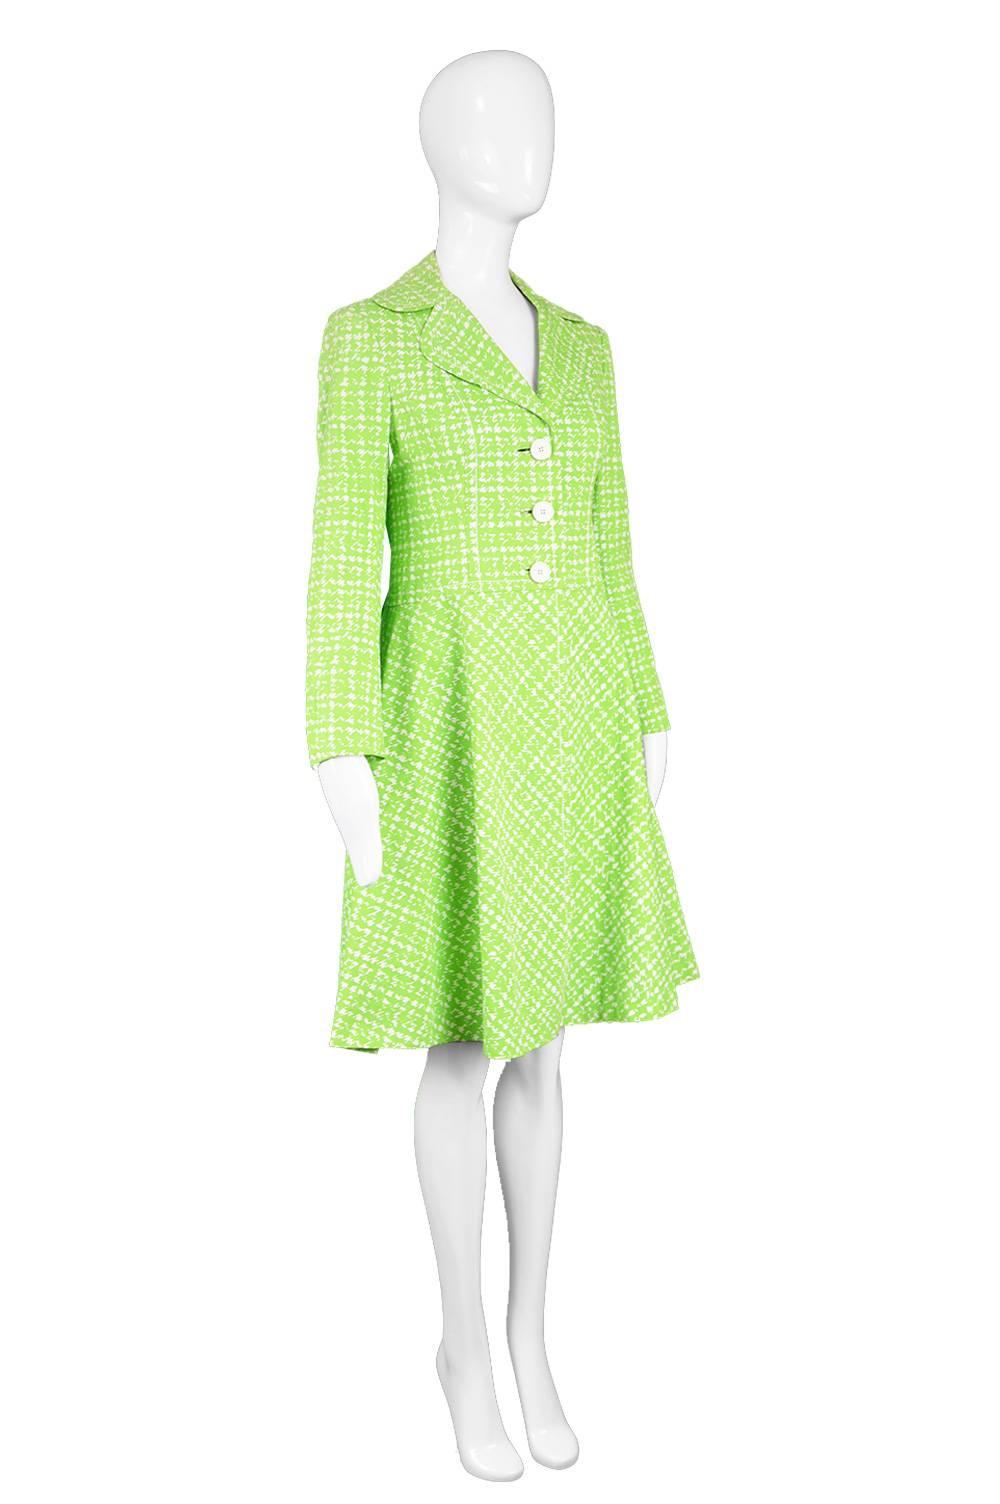 Diorling by Christian Dior London Vintage Green & White Cotton Mod Coat, 1960s 3